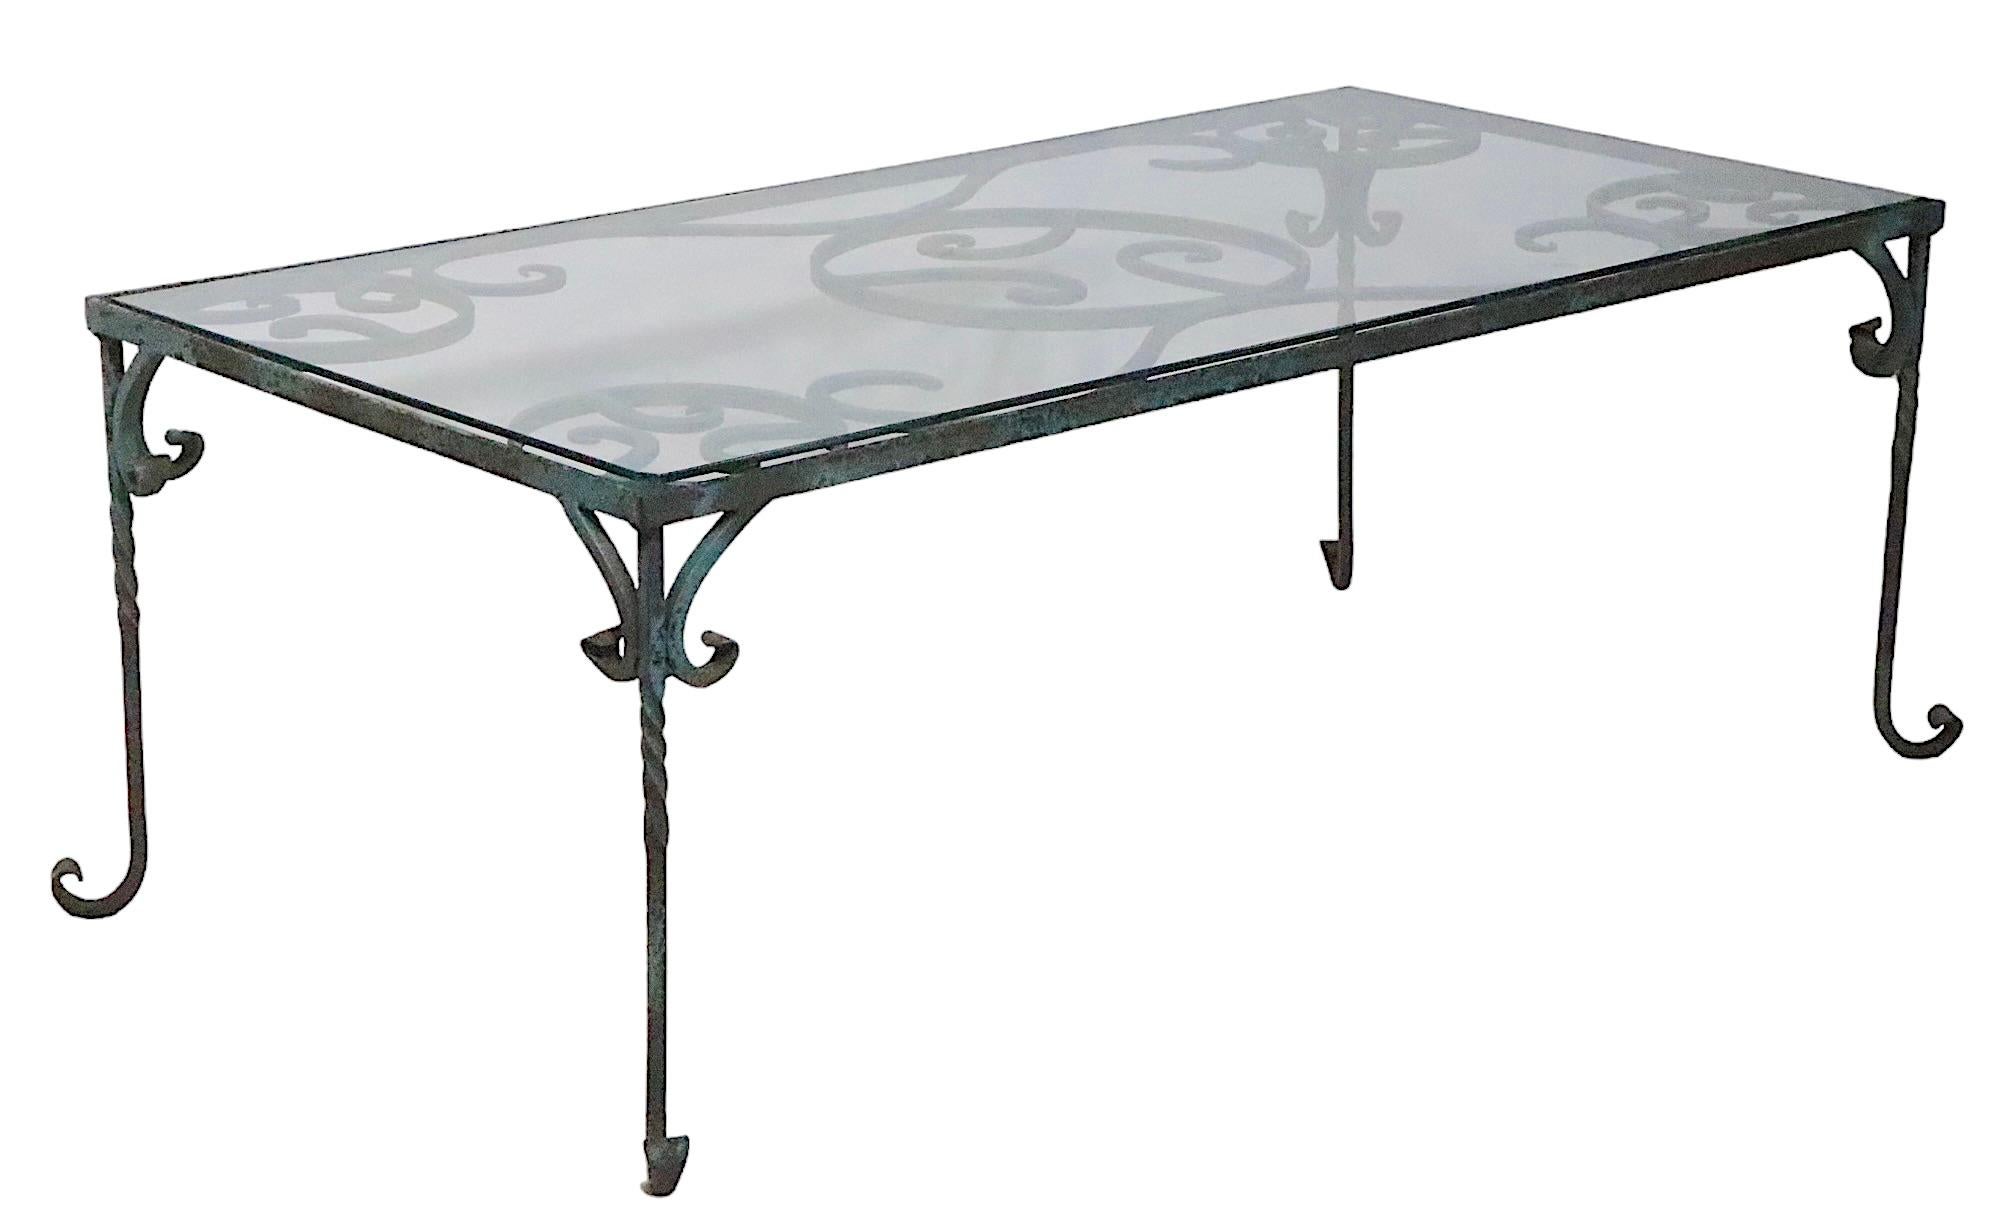 Exquisite wrought iron coffee table in original patinated old paint surface. The table features a decorative scroll work top, and delicate curled iron feet. It is hard to find the coffee table form, and this one is exceptional. The glass top shown